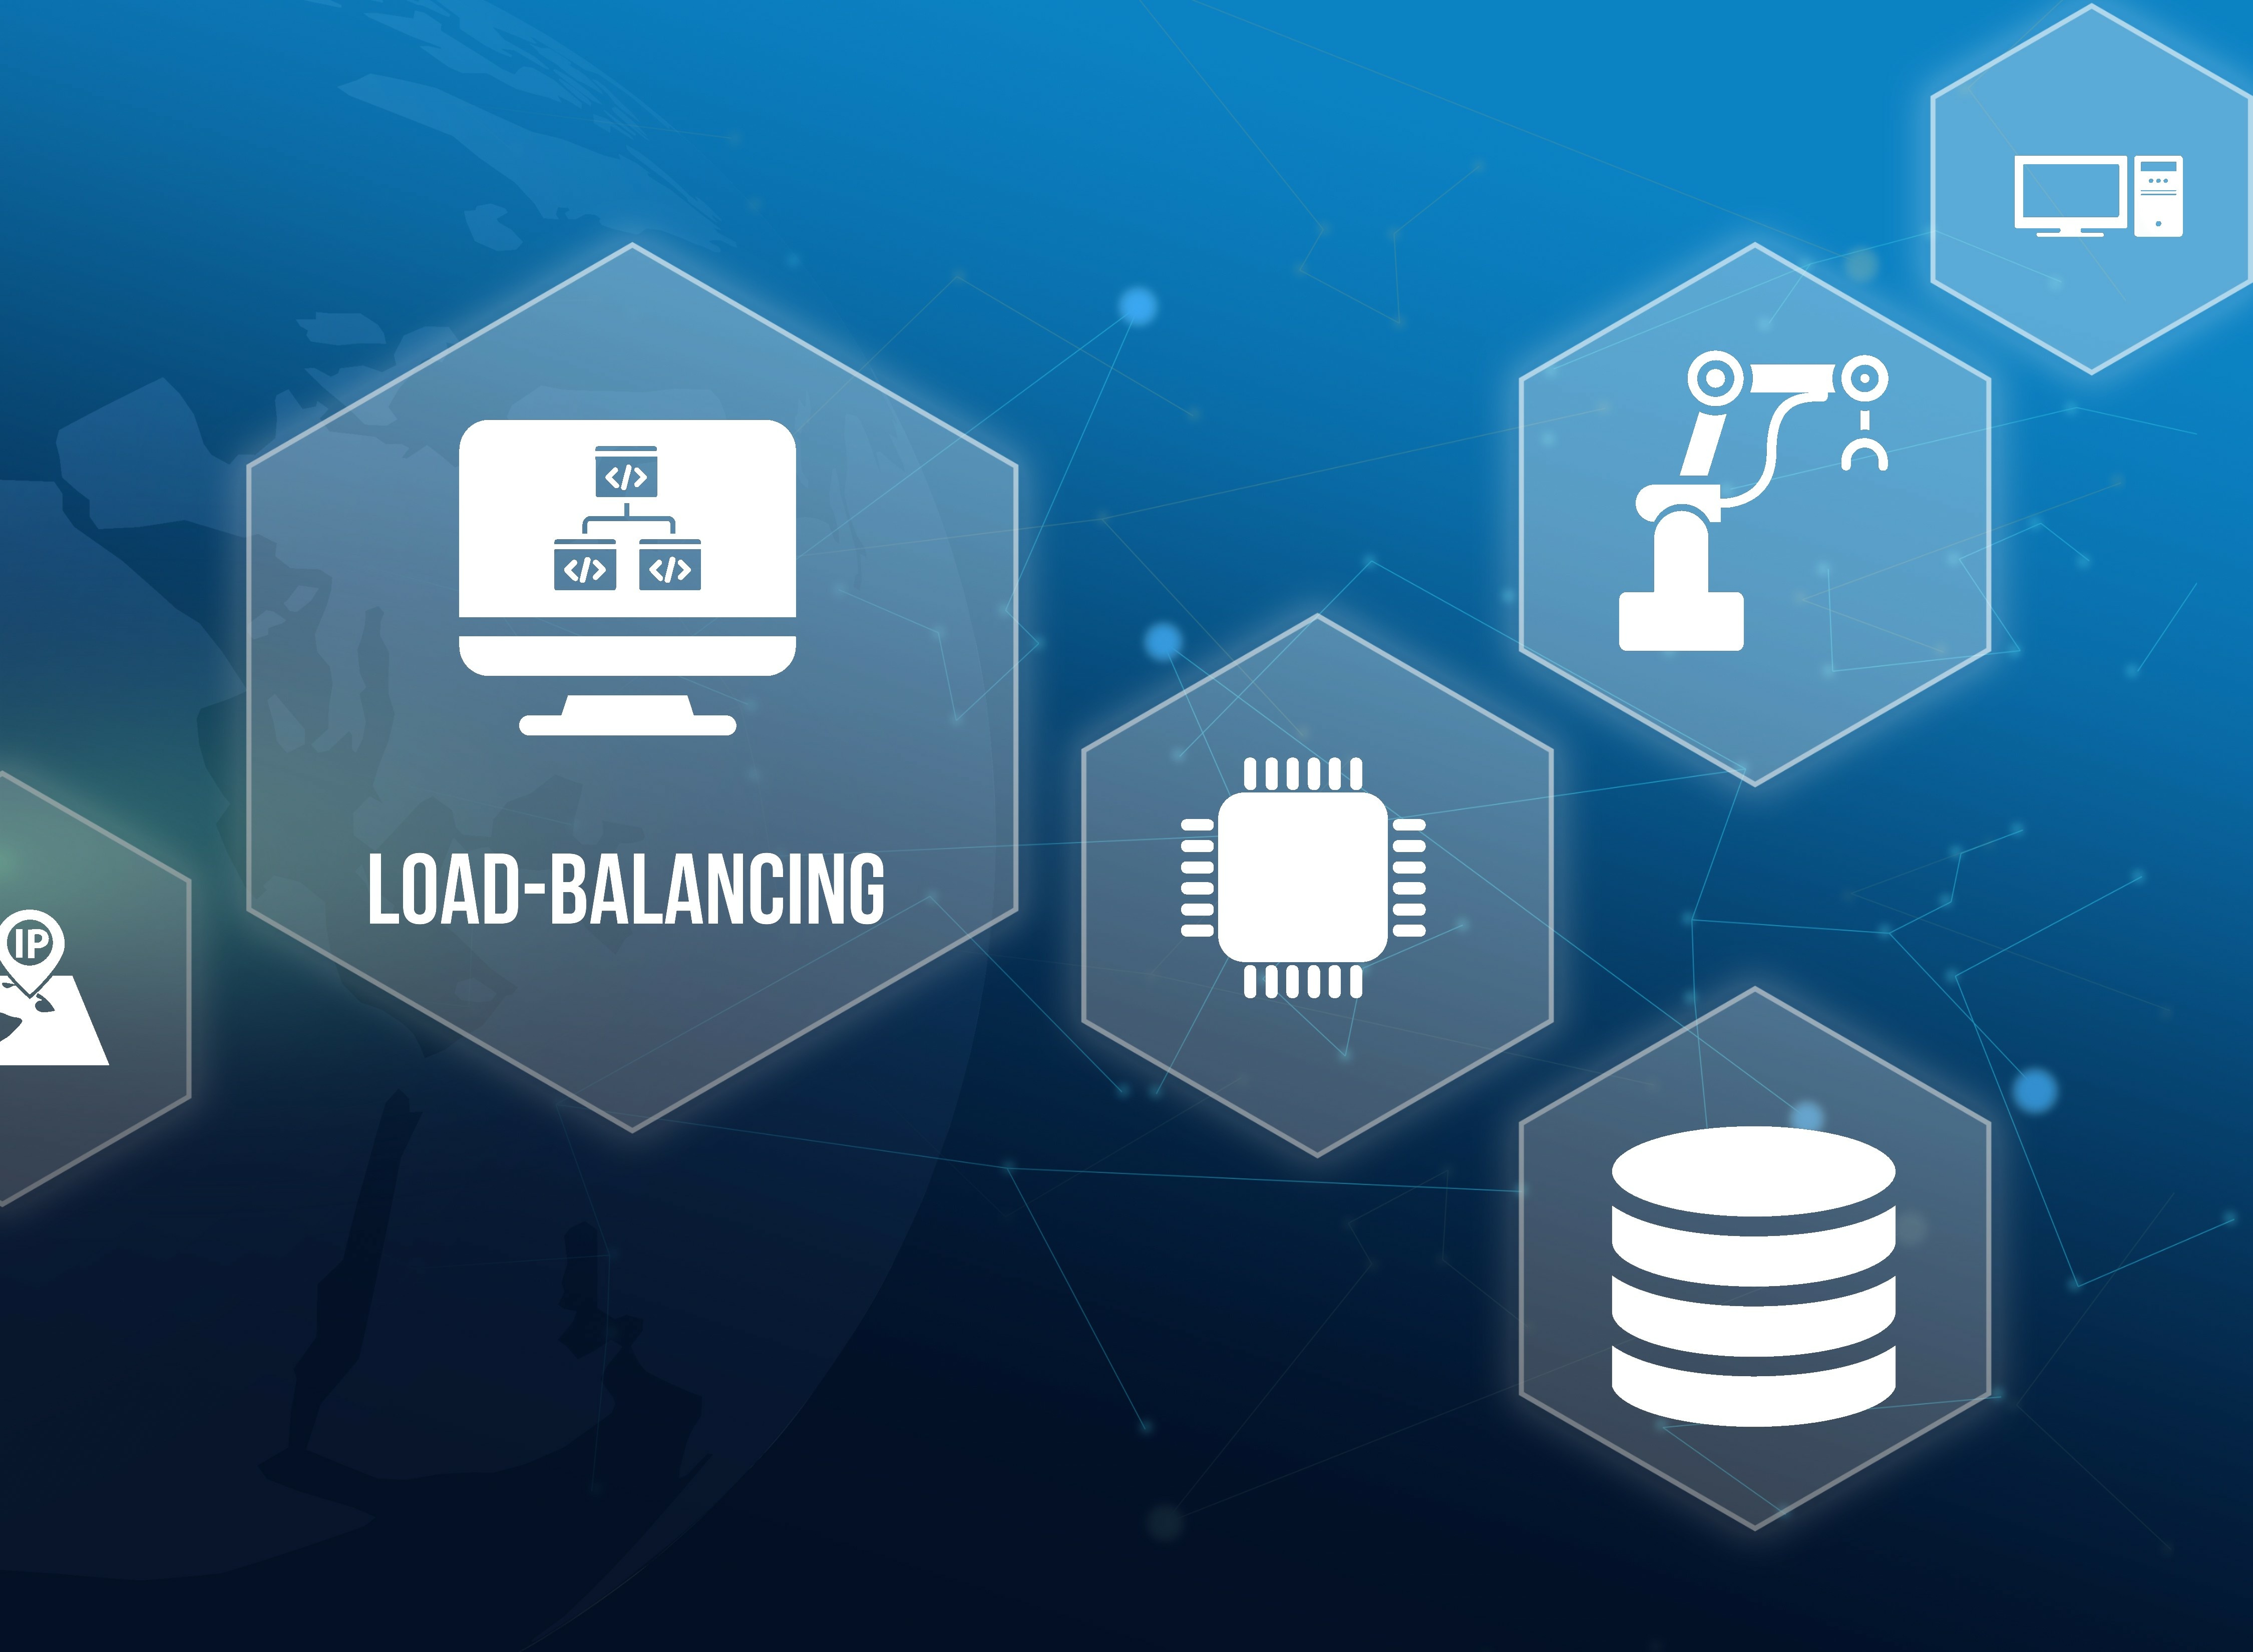 Server load balancing - what is it?